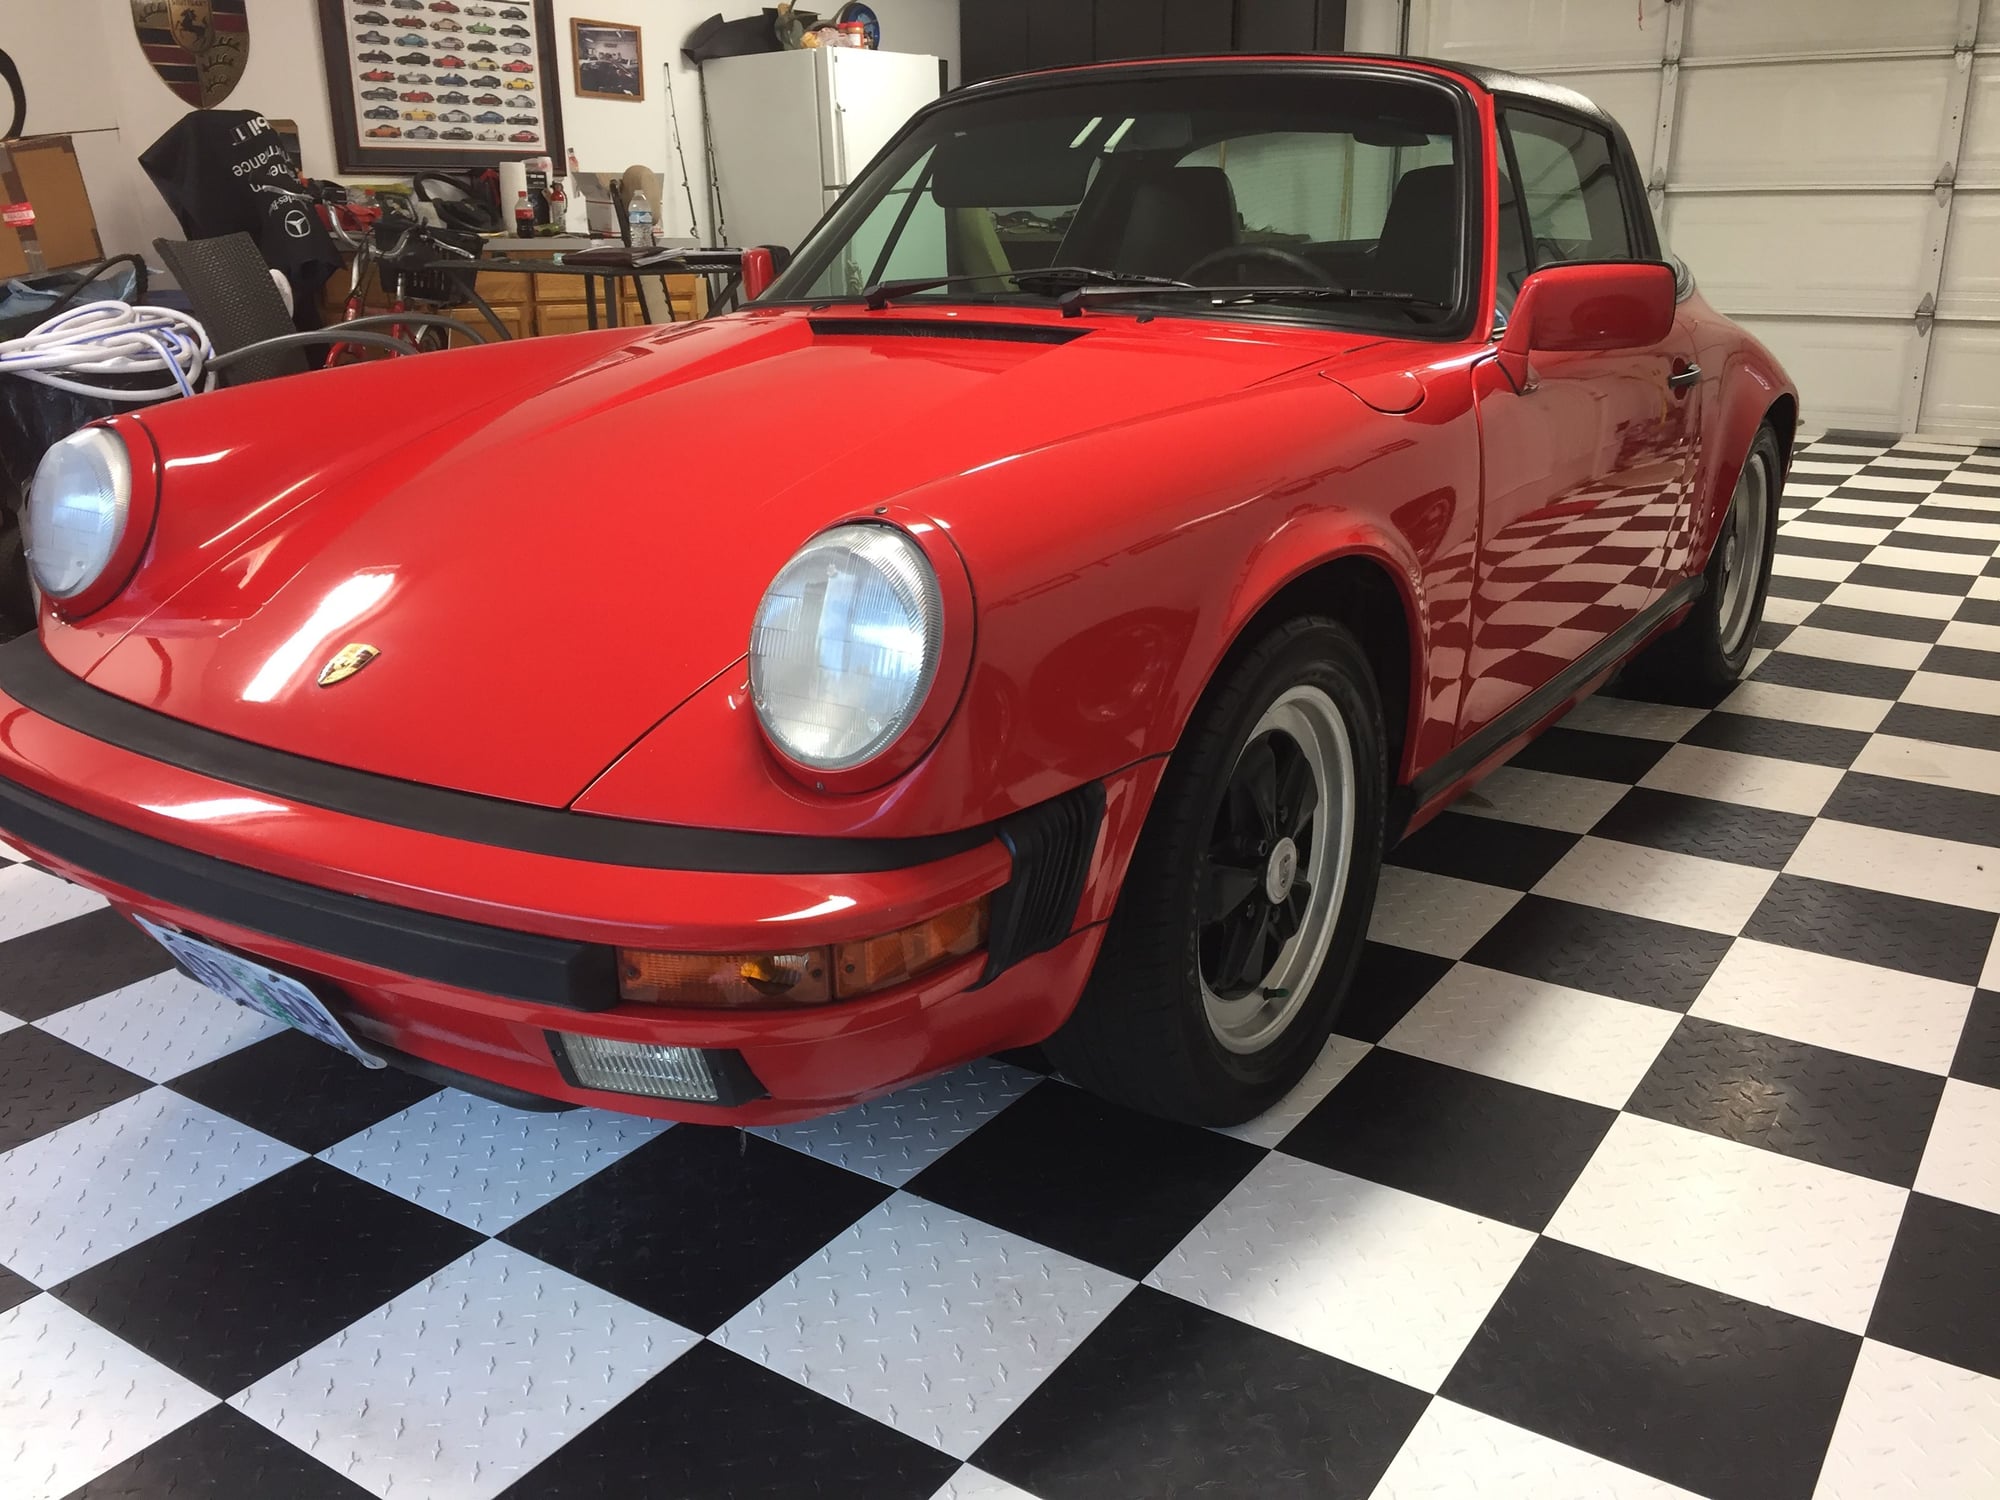 1988 Porsche 911 - 1988 PORSCHE AIR COOLED G50 - Used - VIN WP0EB0914JS161372 - 79,634 Miles - 2WD - Manual - Coupe - Red - Lebanon, TN 37090, United States